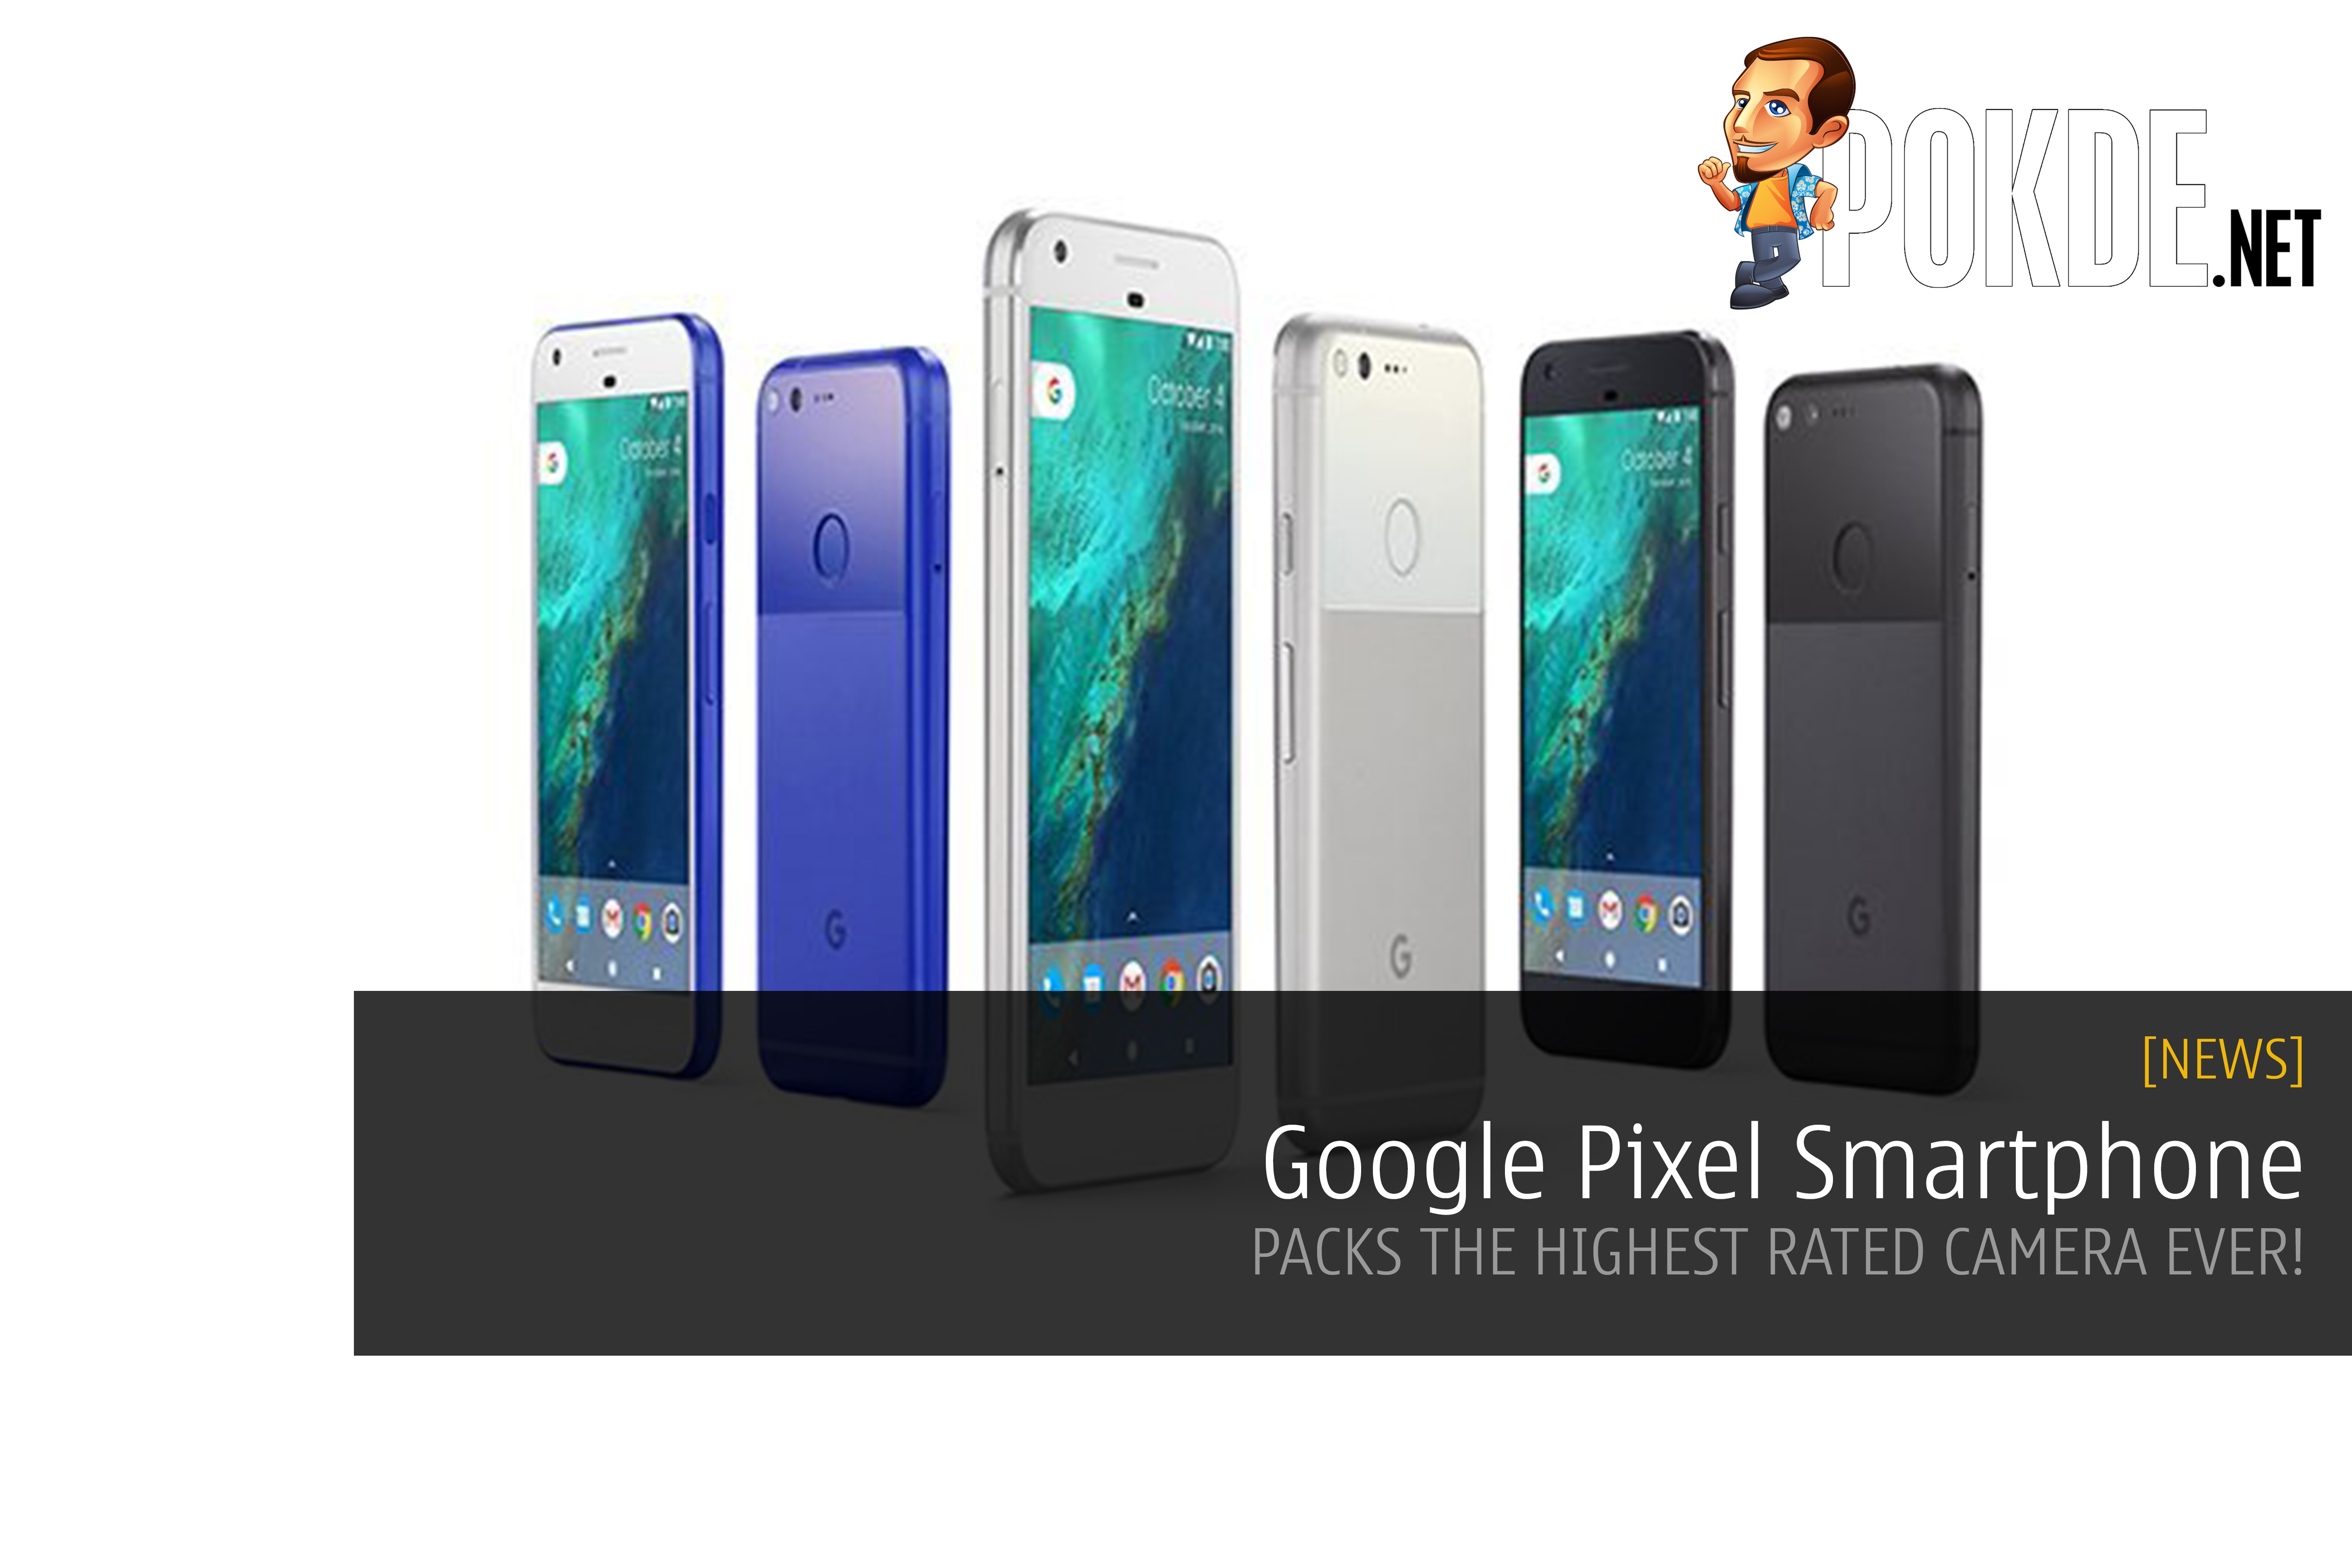 Google Pixel smartphone "made by Google" packs the highest rated camera ever 38